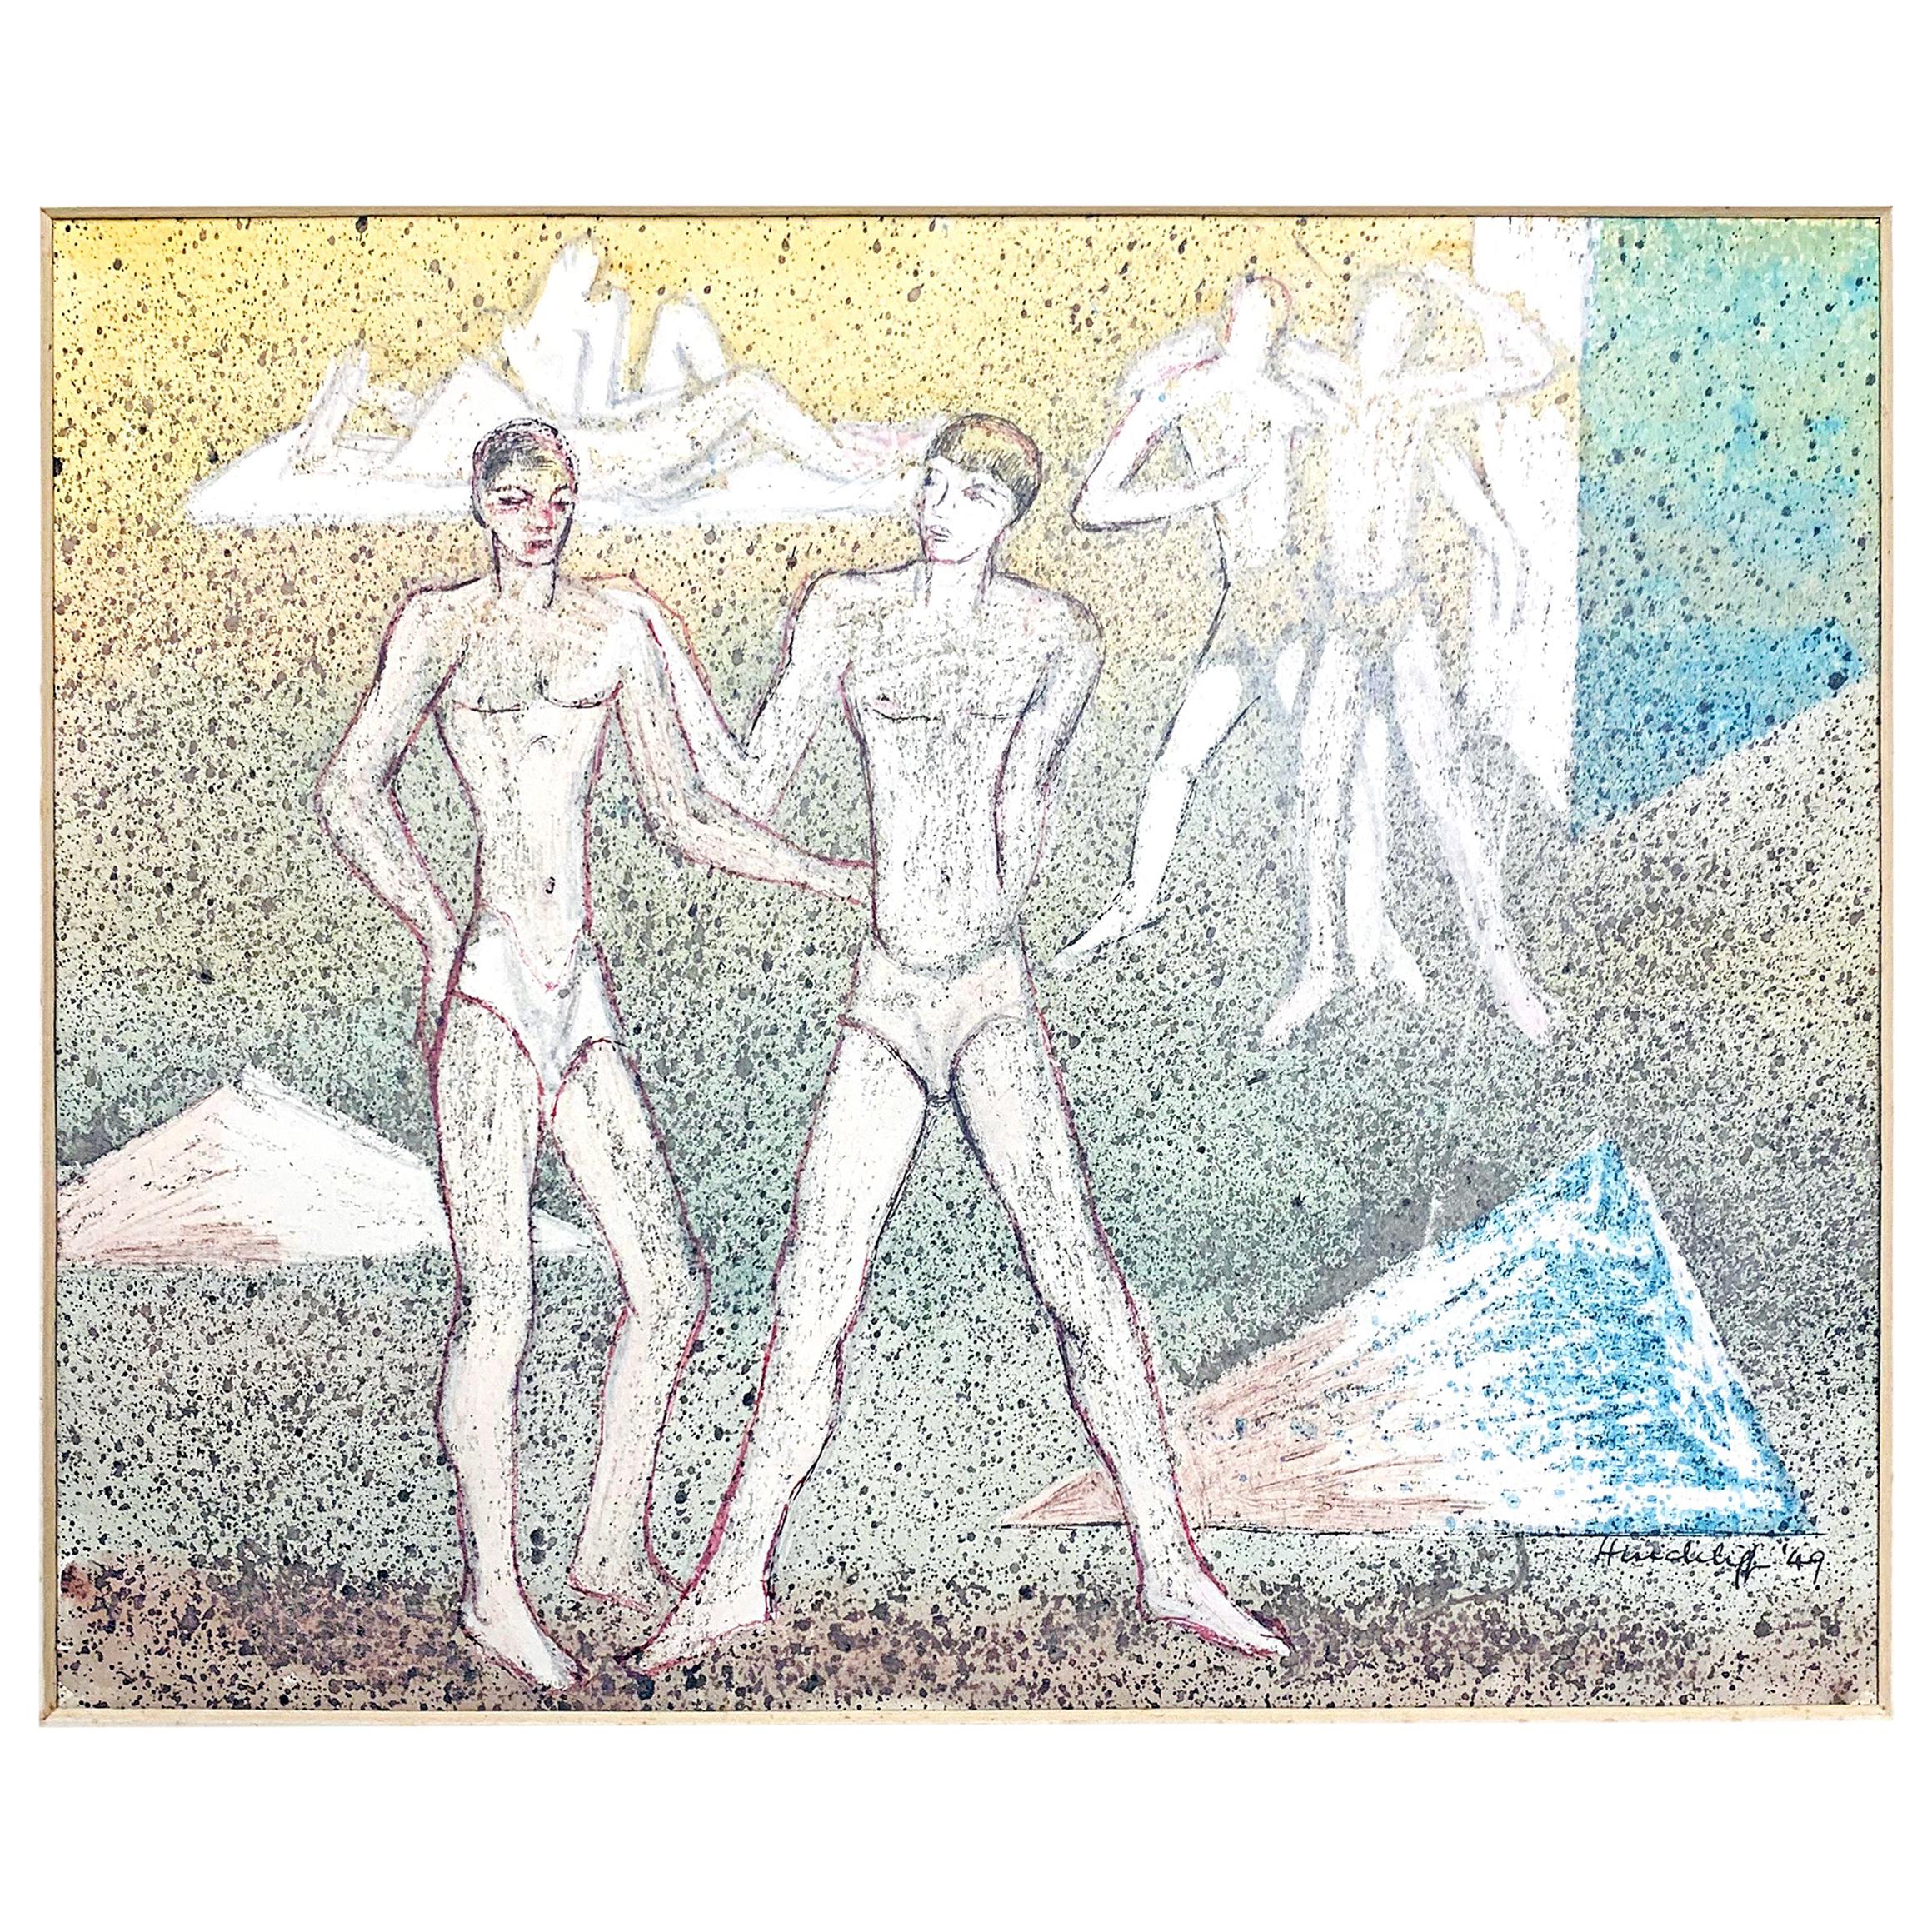 "Adolescent Parallels, " Midcentury Mural Design with Male Youths, 1949